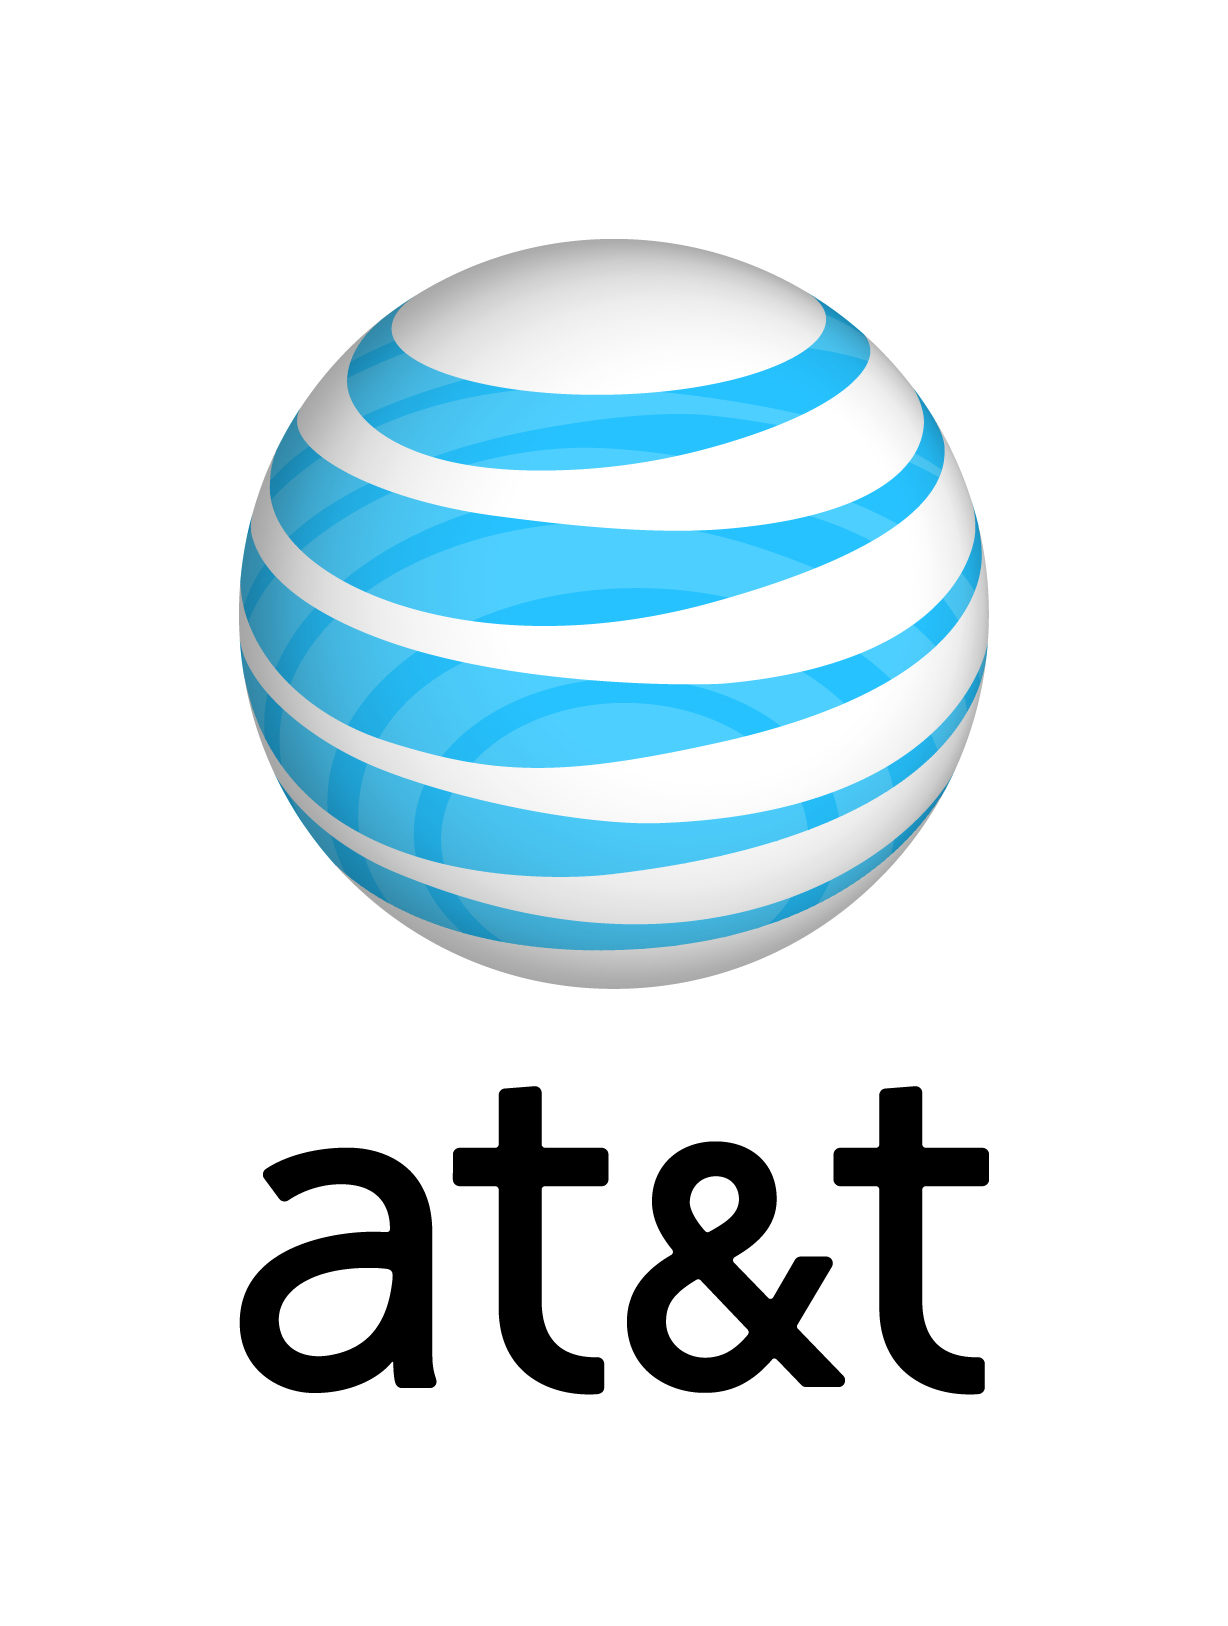 AT&T Retail Store